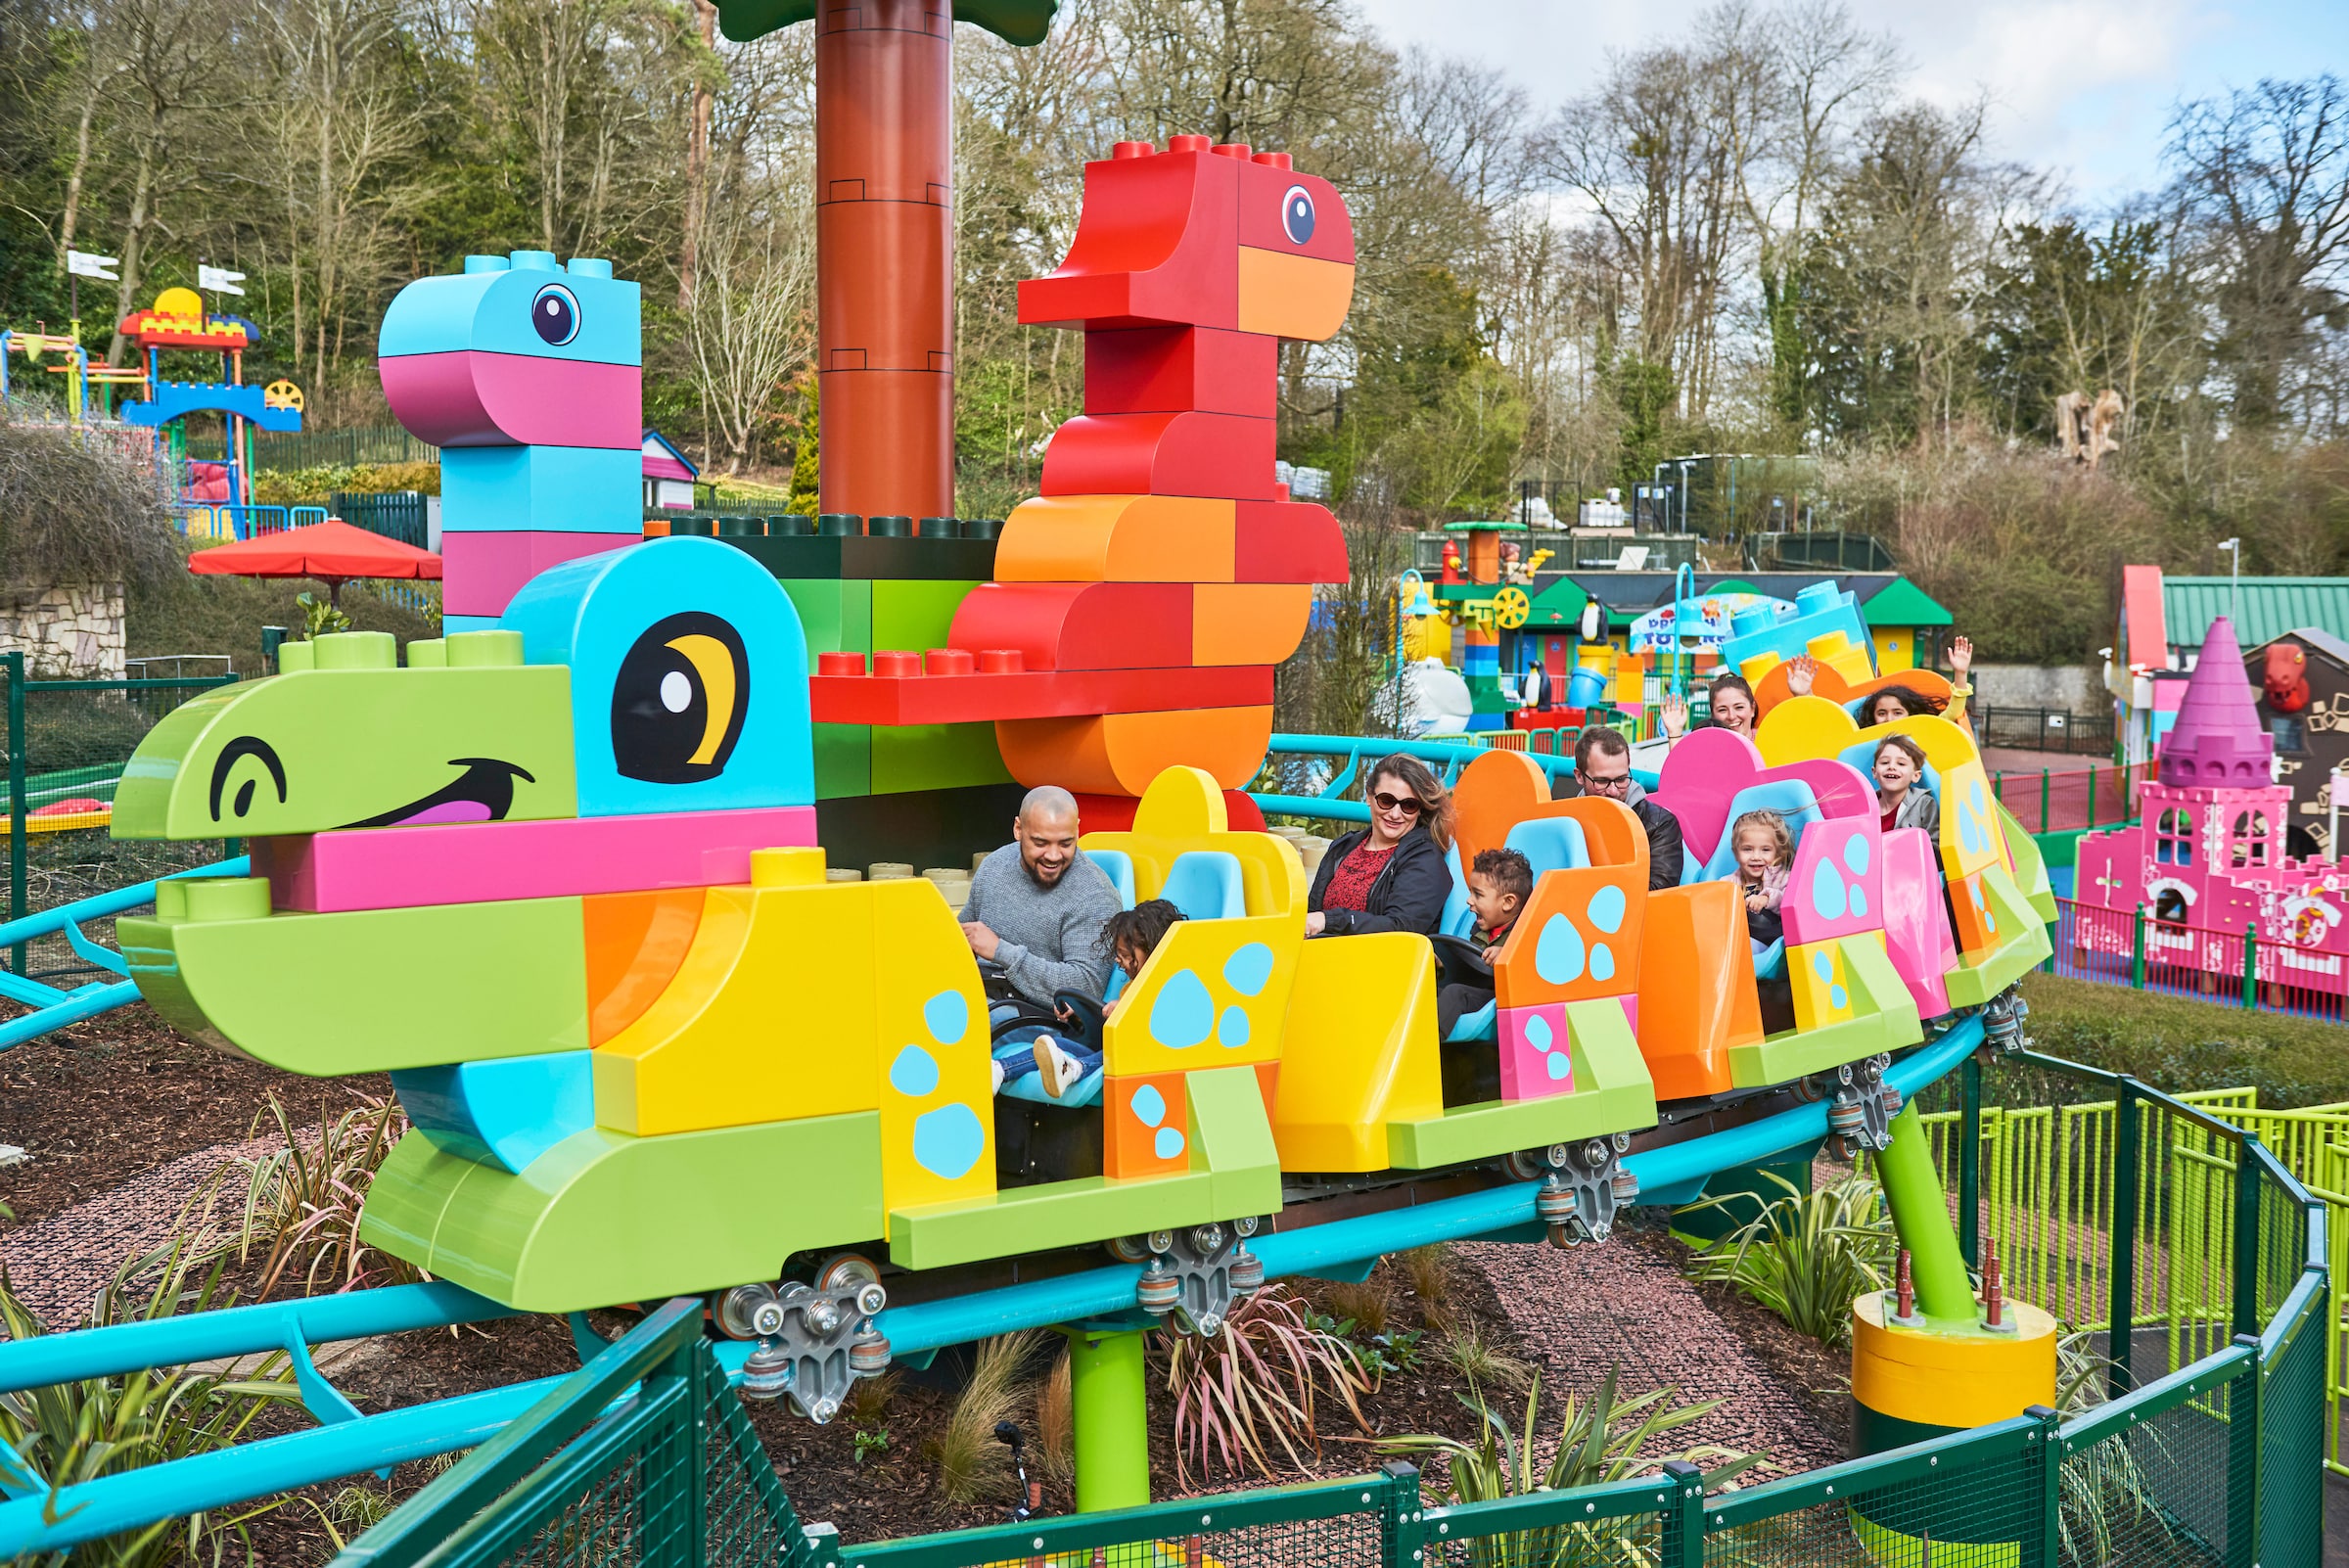 What's Coming To LEGOLAND Windsor Resort in 2023?